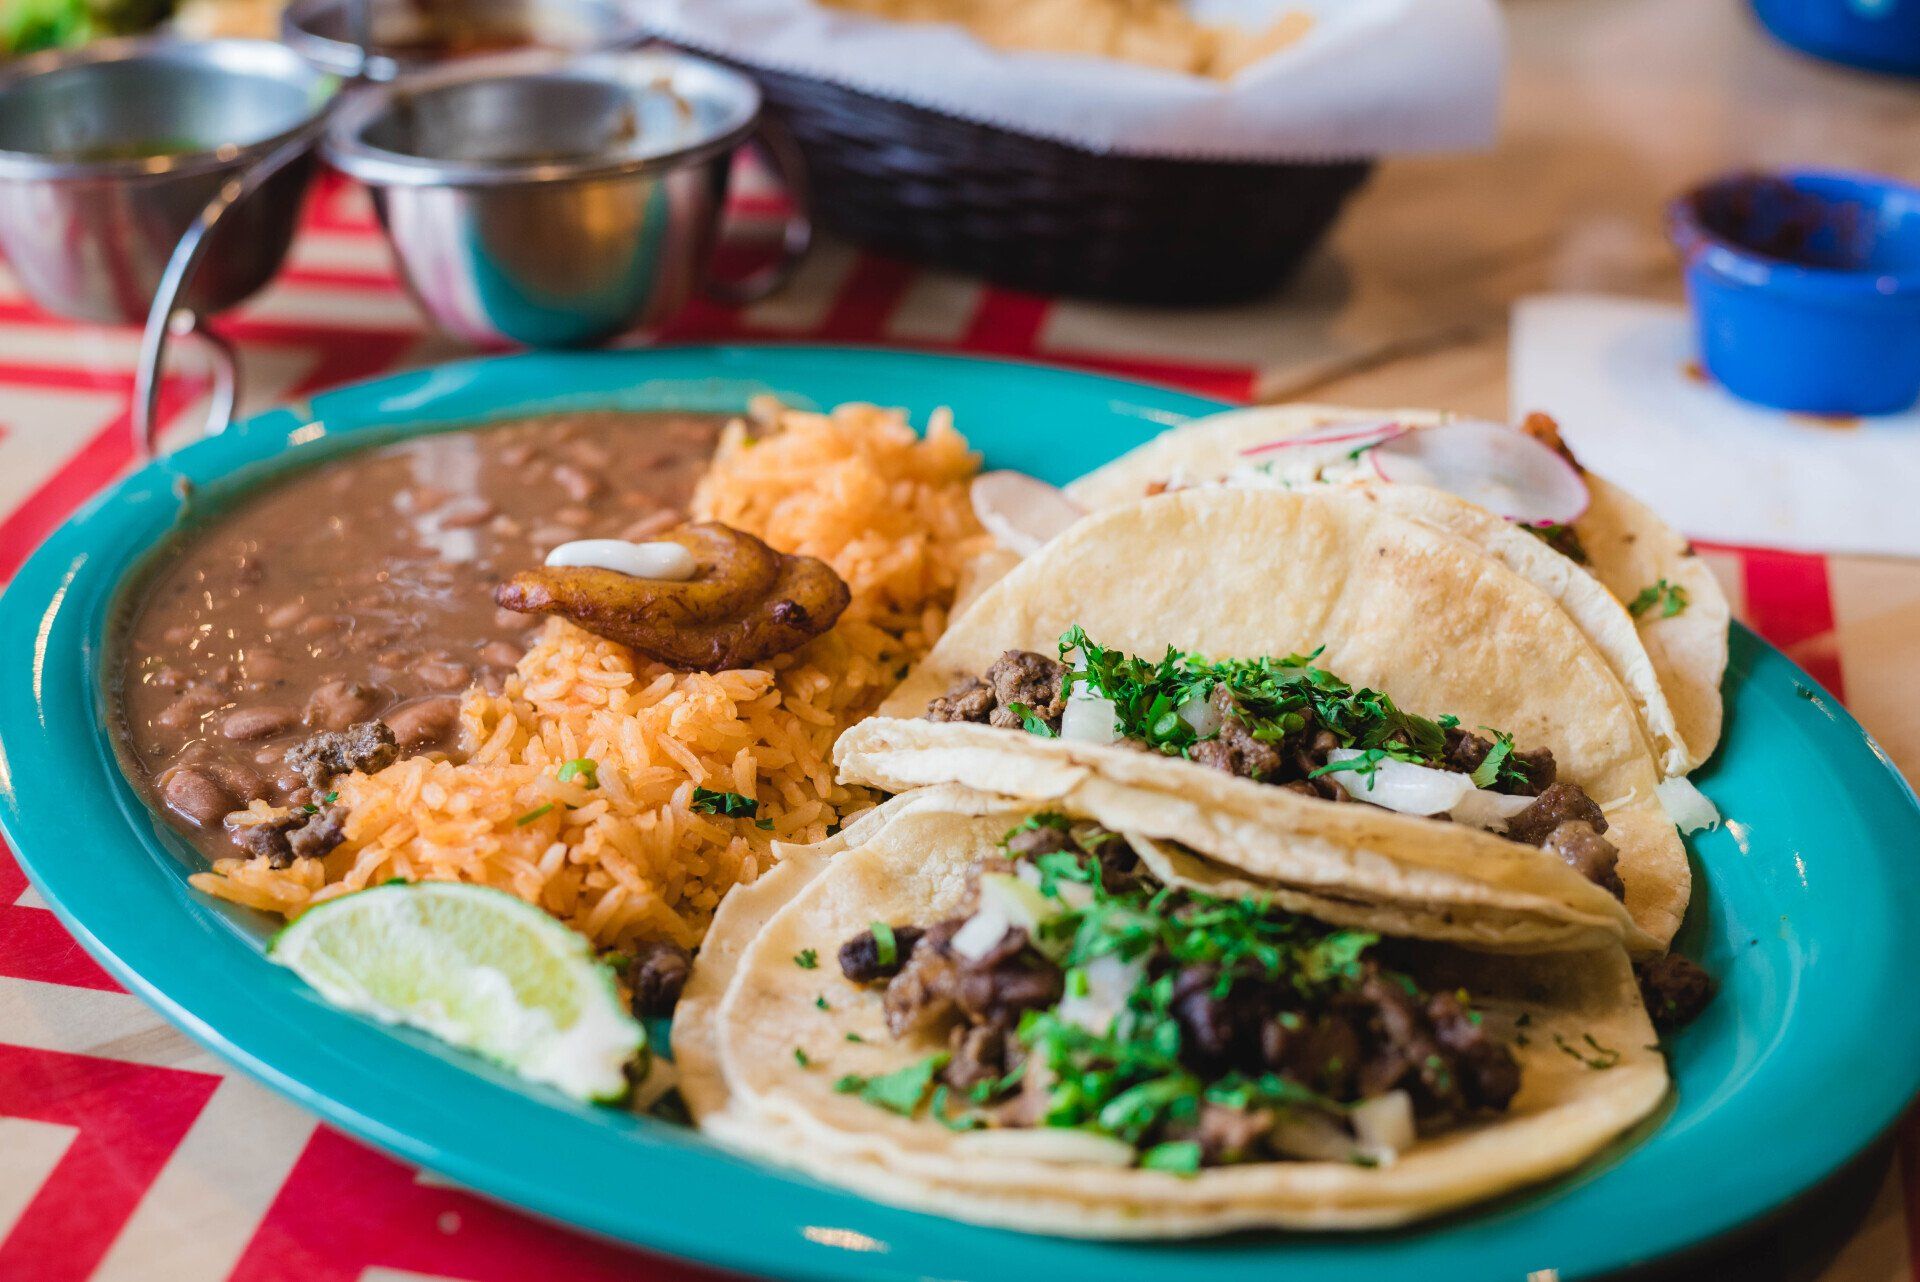 A plate of tacos , rice and beans on a table.